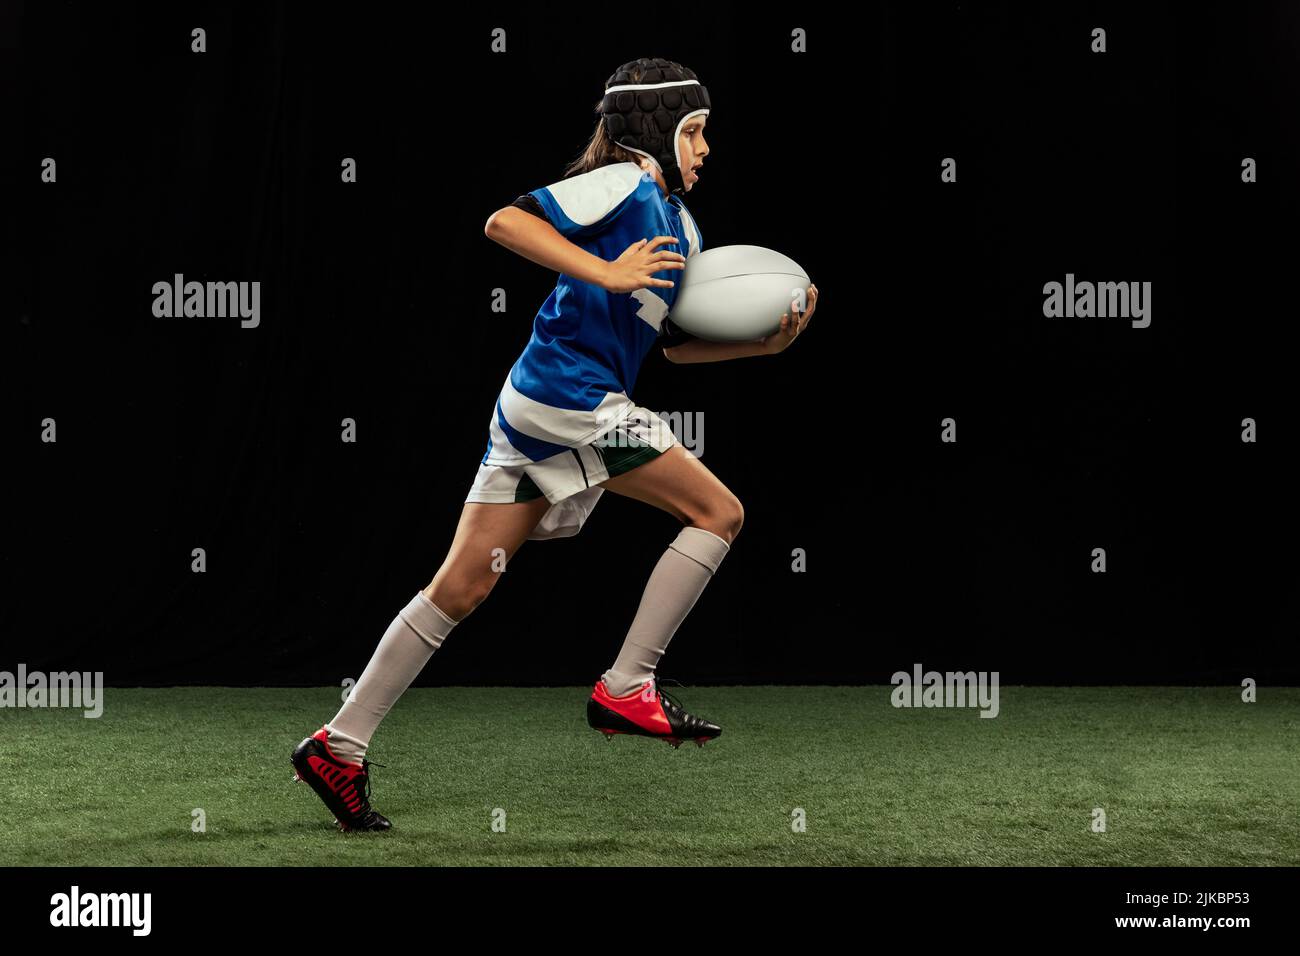 Dynamic portrait of school age boy, junior male rugby player practicing rugby football isolated on dark background with grass floooring. Stock Photo